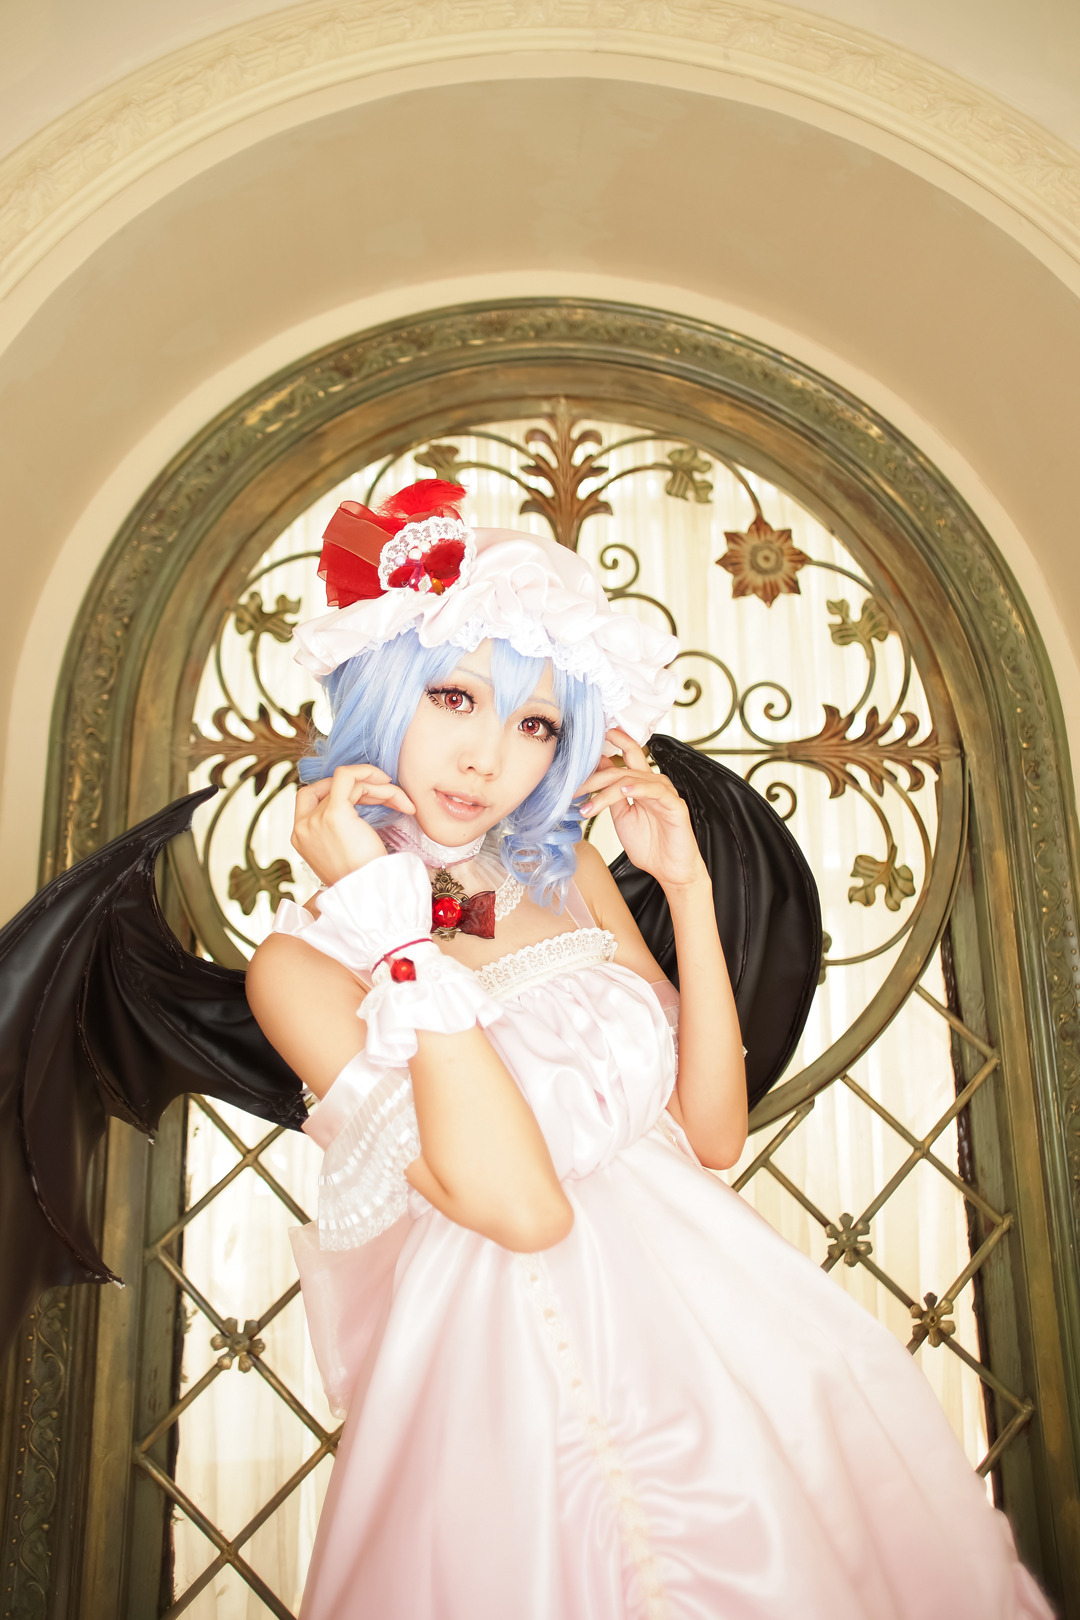 Touhou Project - Remilia Scarlet (Ely) 2HELP US GROW Like,Comment &amp; Share.CosplayJapaneseGirls1.5